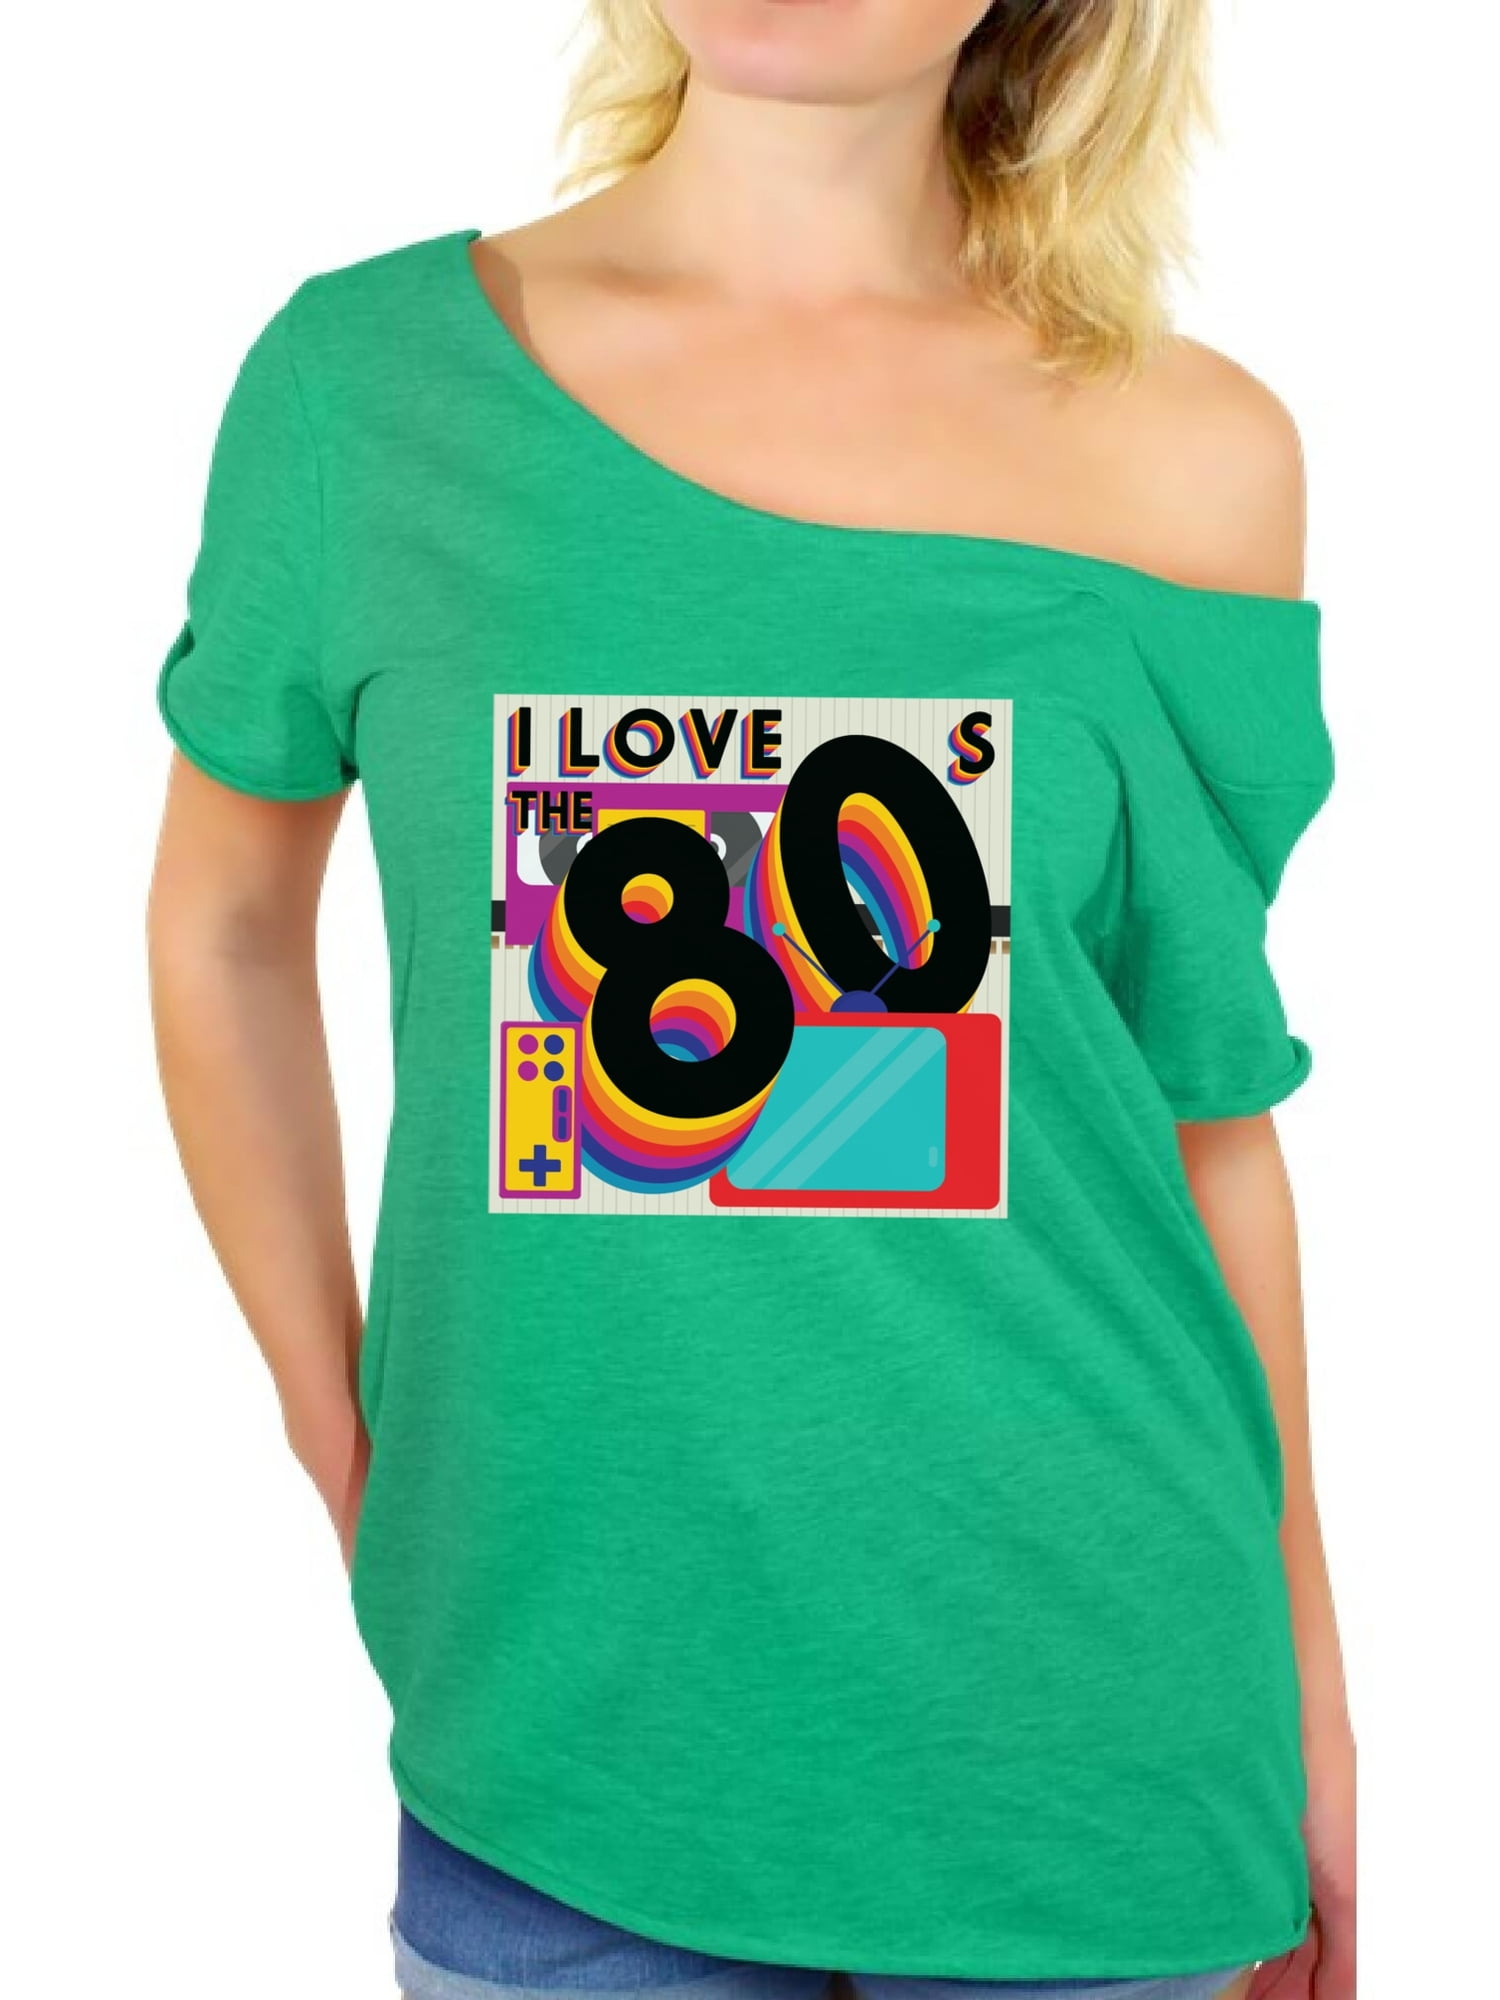 Awkward Styles Awkward Styles 80s Shirt Off Shoulder 80s Clothes For Women I Love The 80s